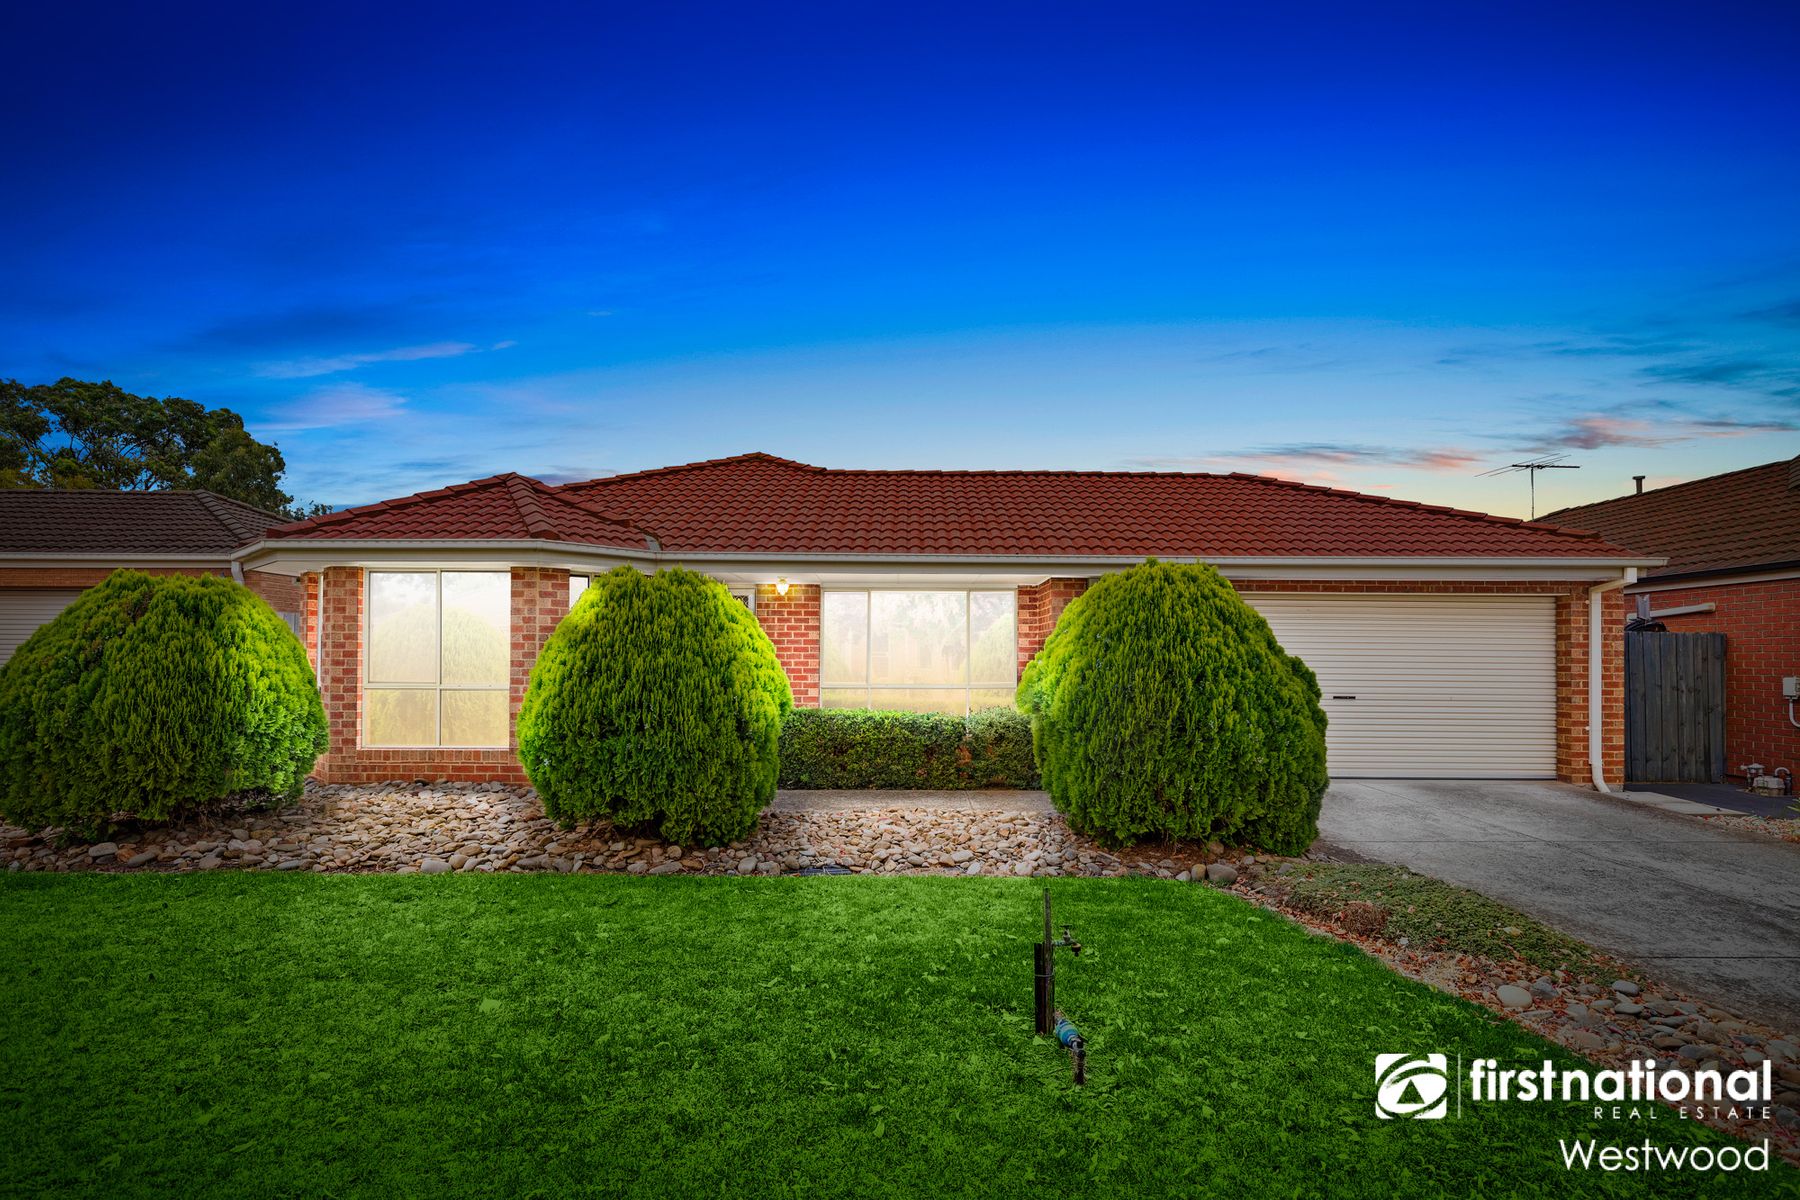 7 Persimmon  Place, Werribee, VIC 3030